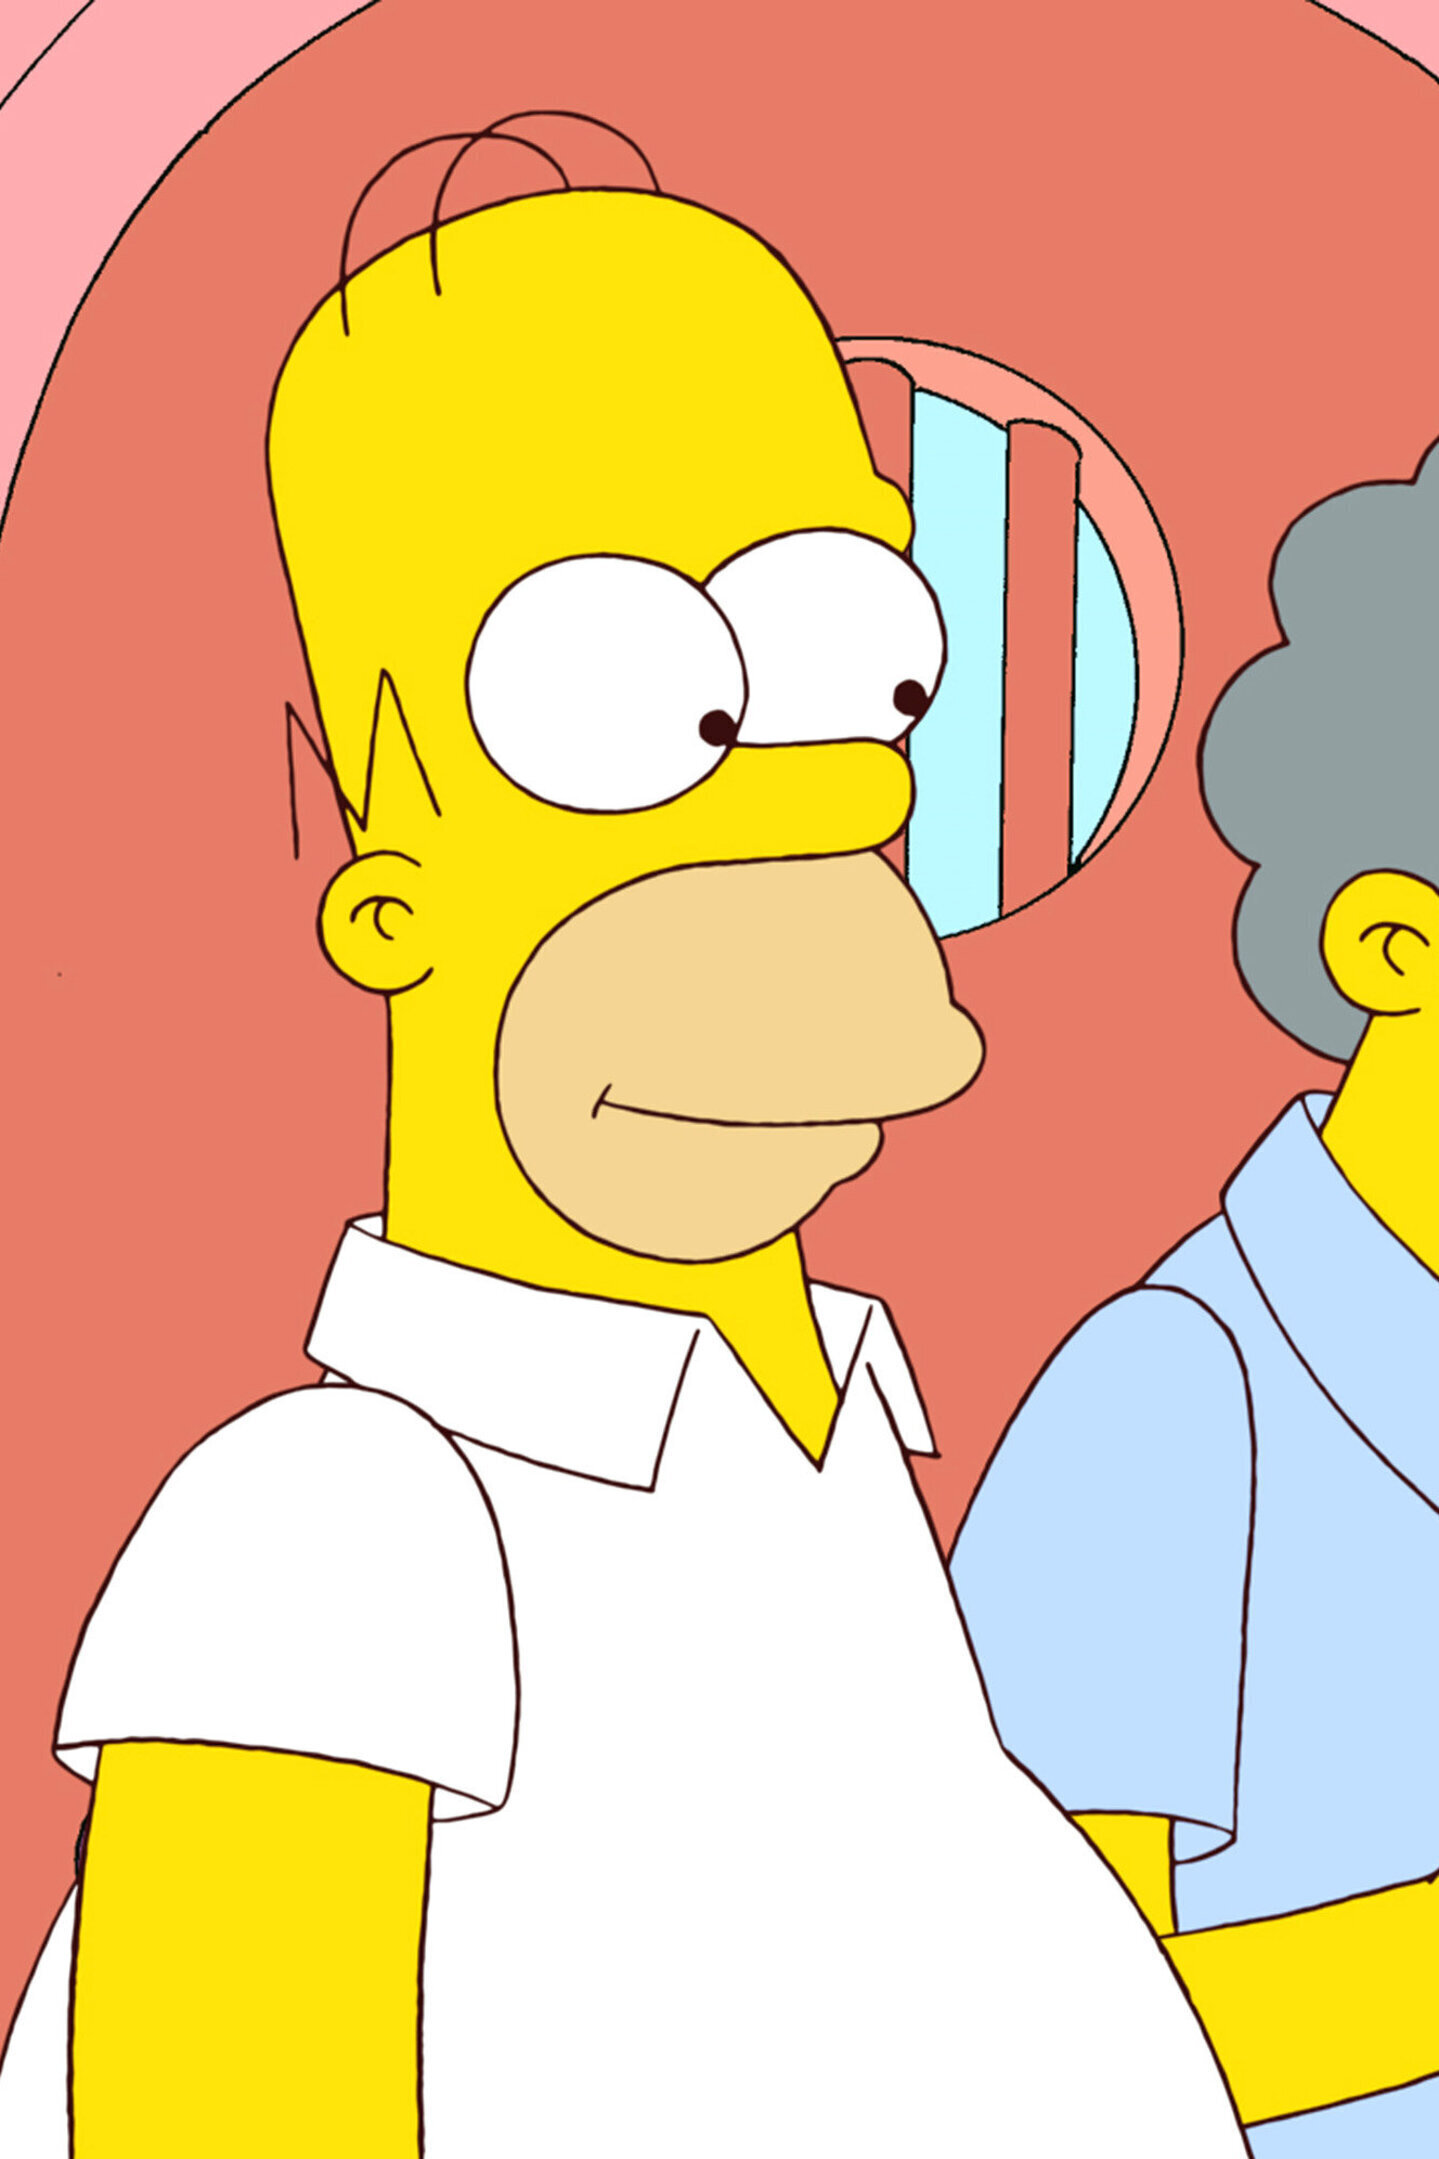 The Simpsons - Moe Goes from Rags to Riches